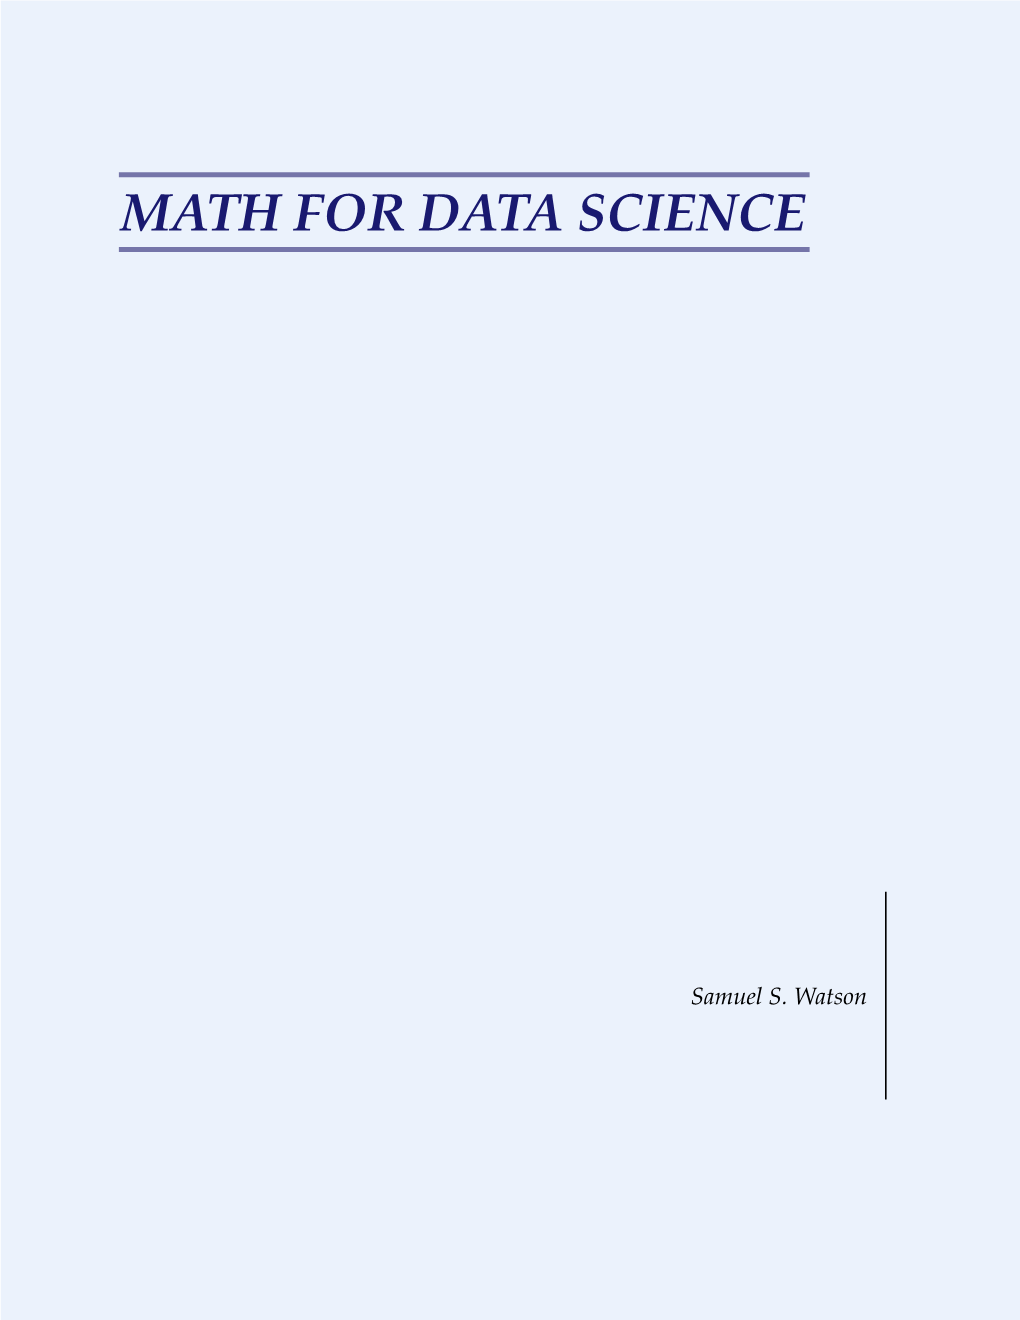 Math for Data Science